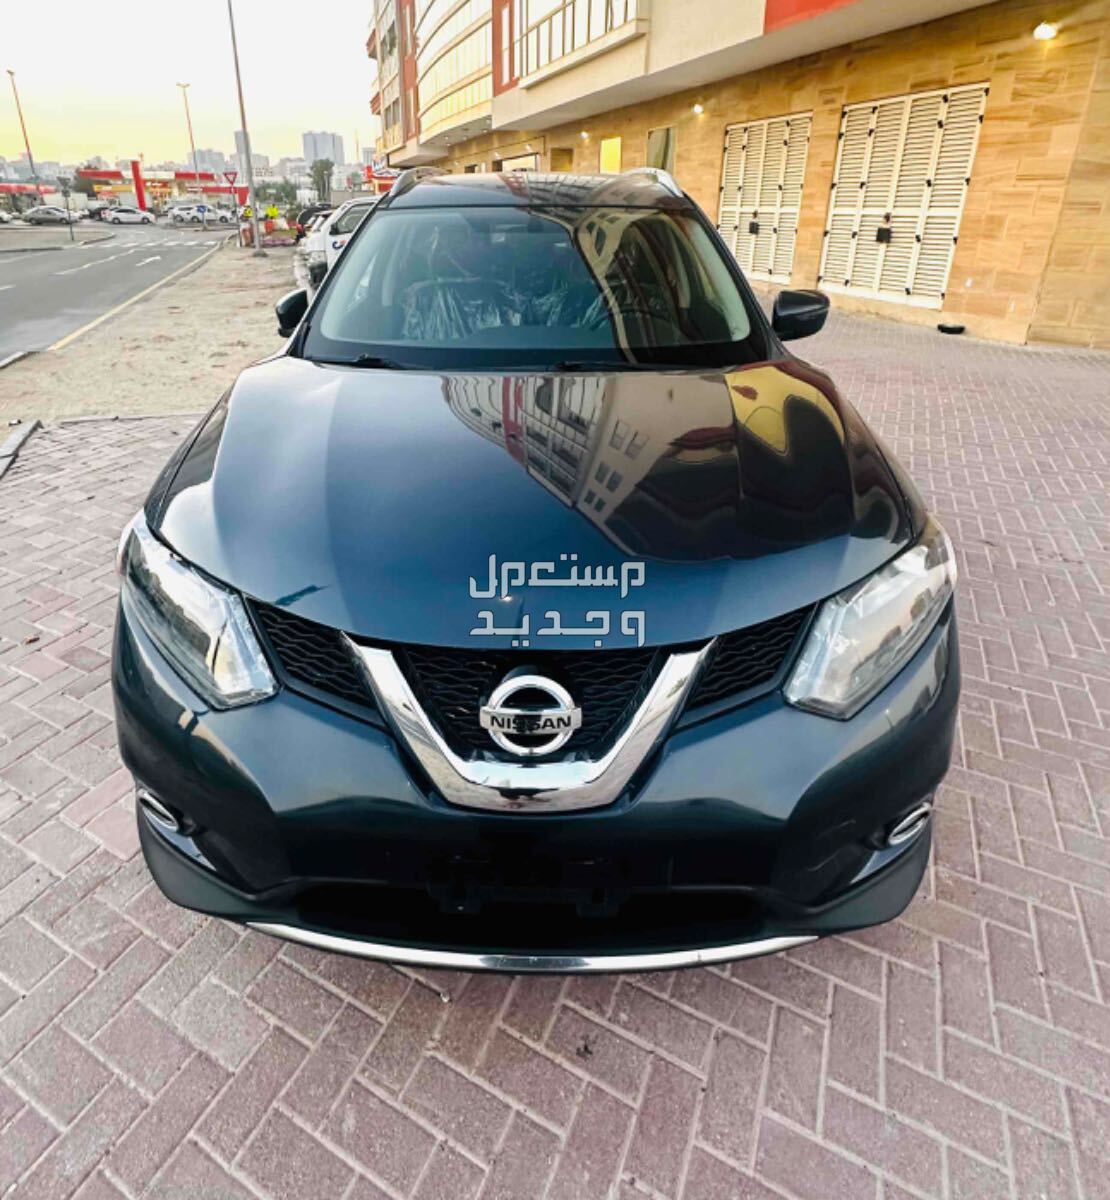 Nissan Rogue 2016 in Dubai at a price of 25 thousands AED